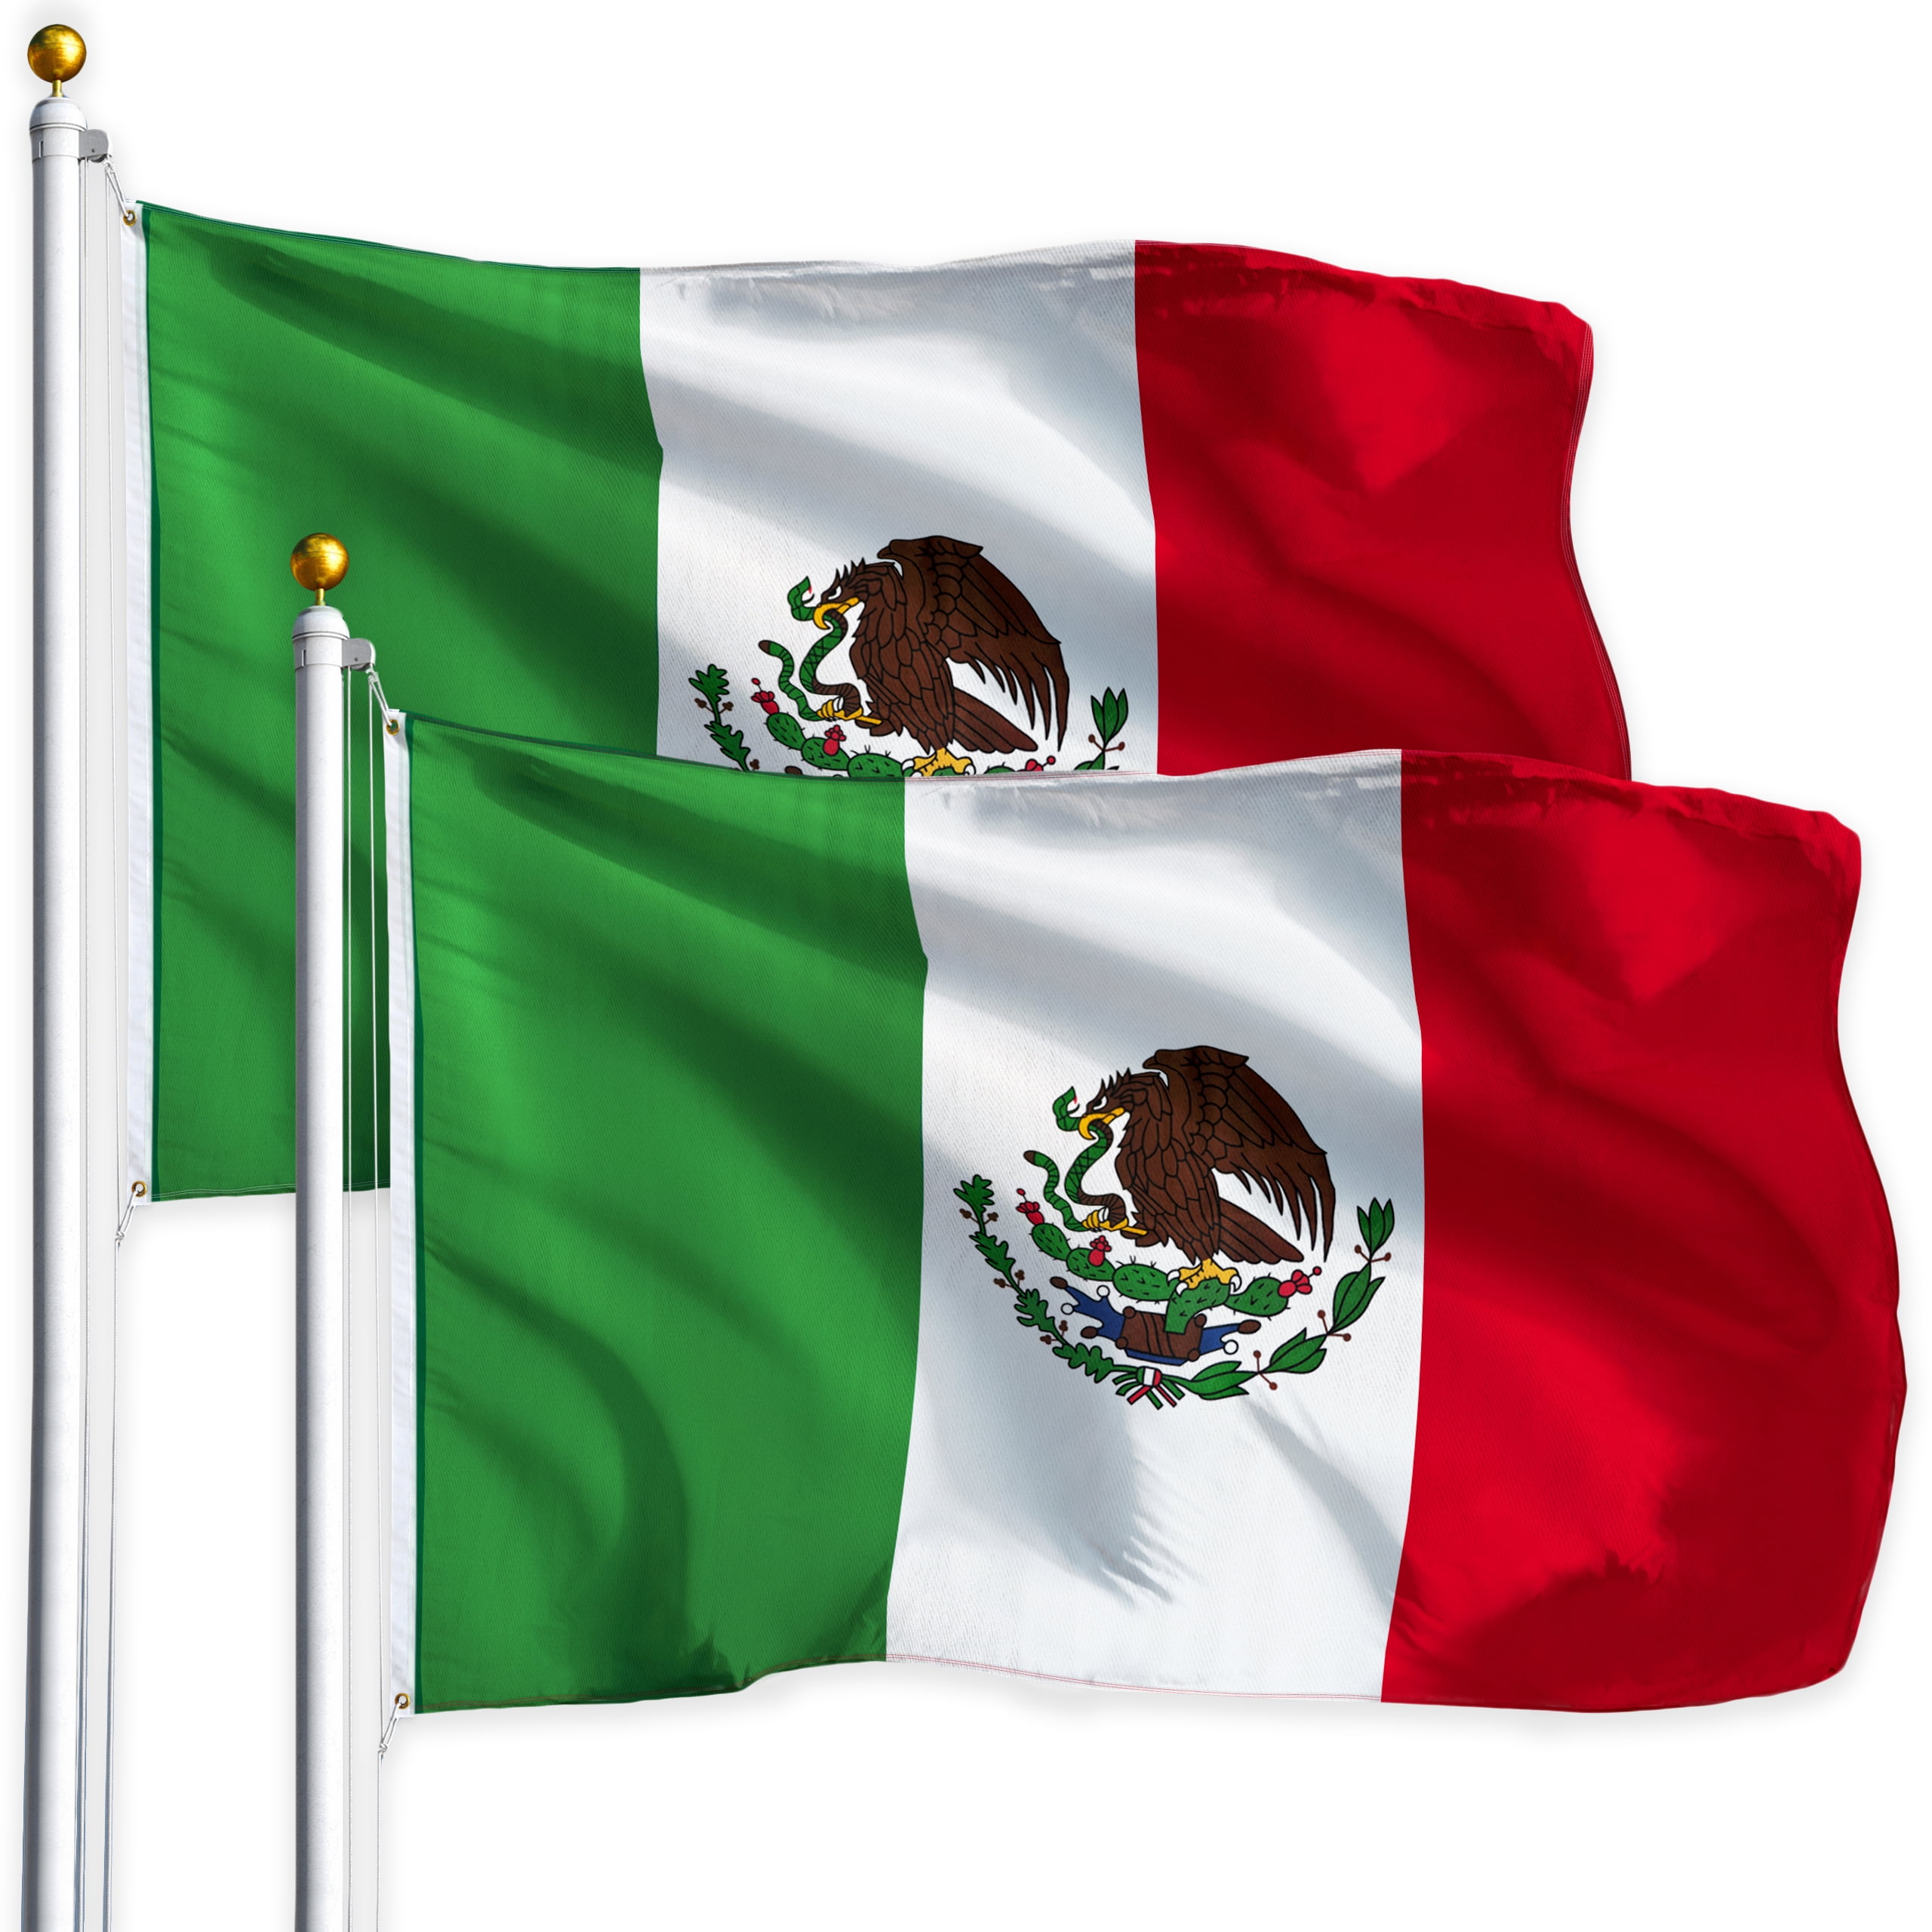 MEXICO 3X5 FT NATIONAL FLAG MADE IN US PREMIUM QUALITY TEXAS FAST SHIPPING 